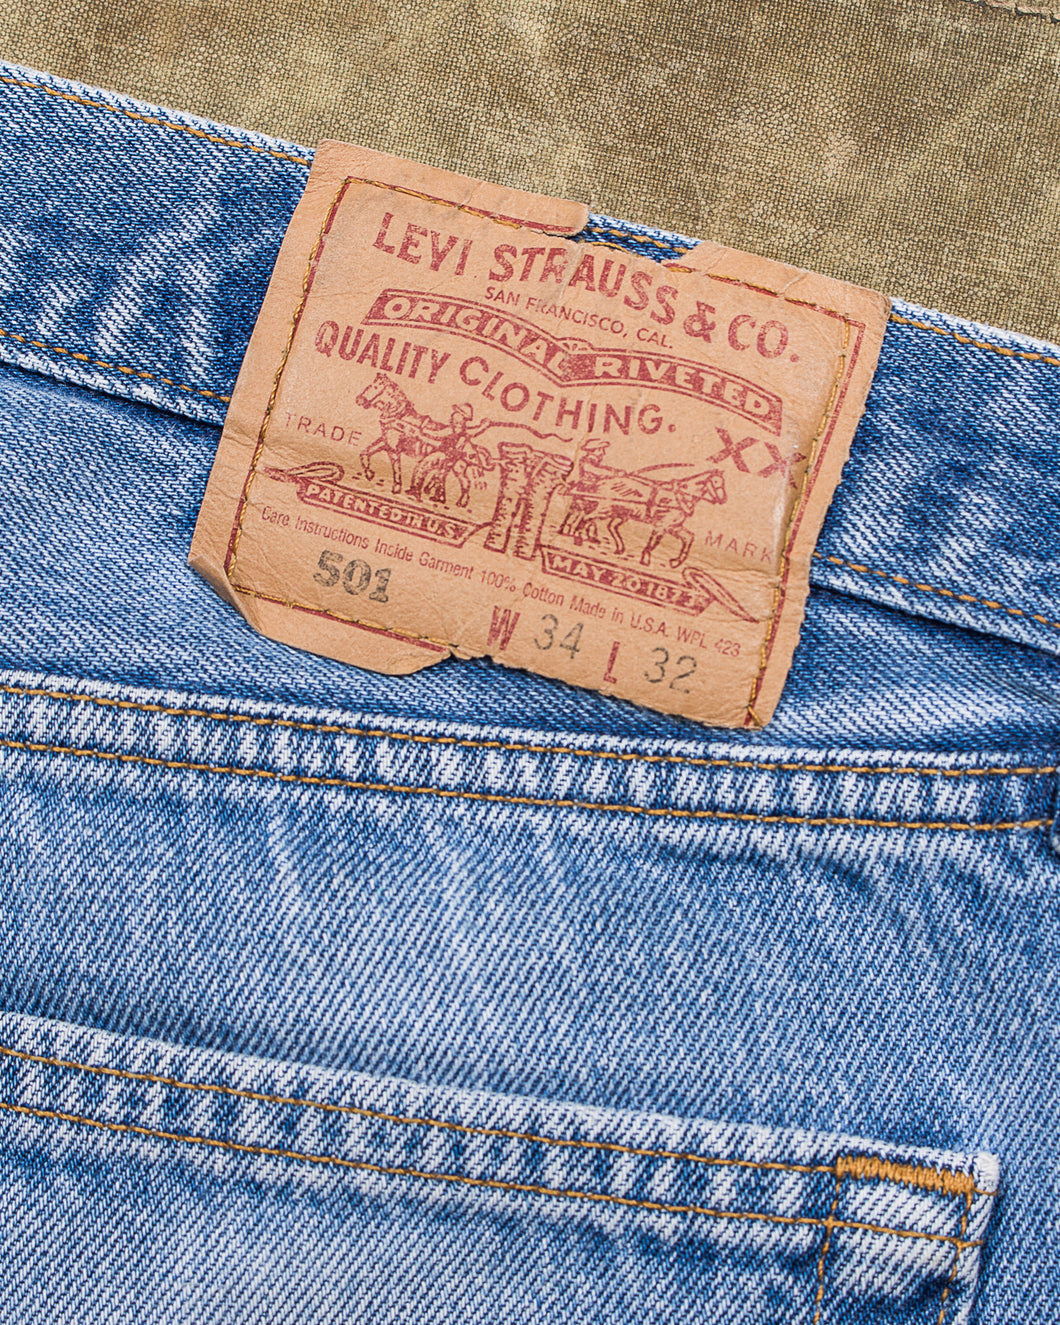 No. 10 Vintage 1990's Made in USA Levi's 501 Jeans W34 – Second